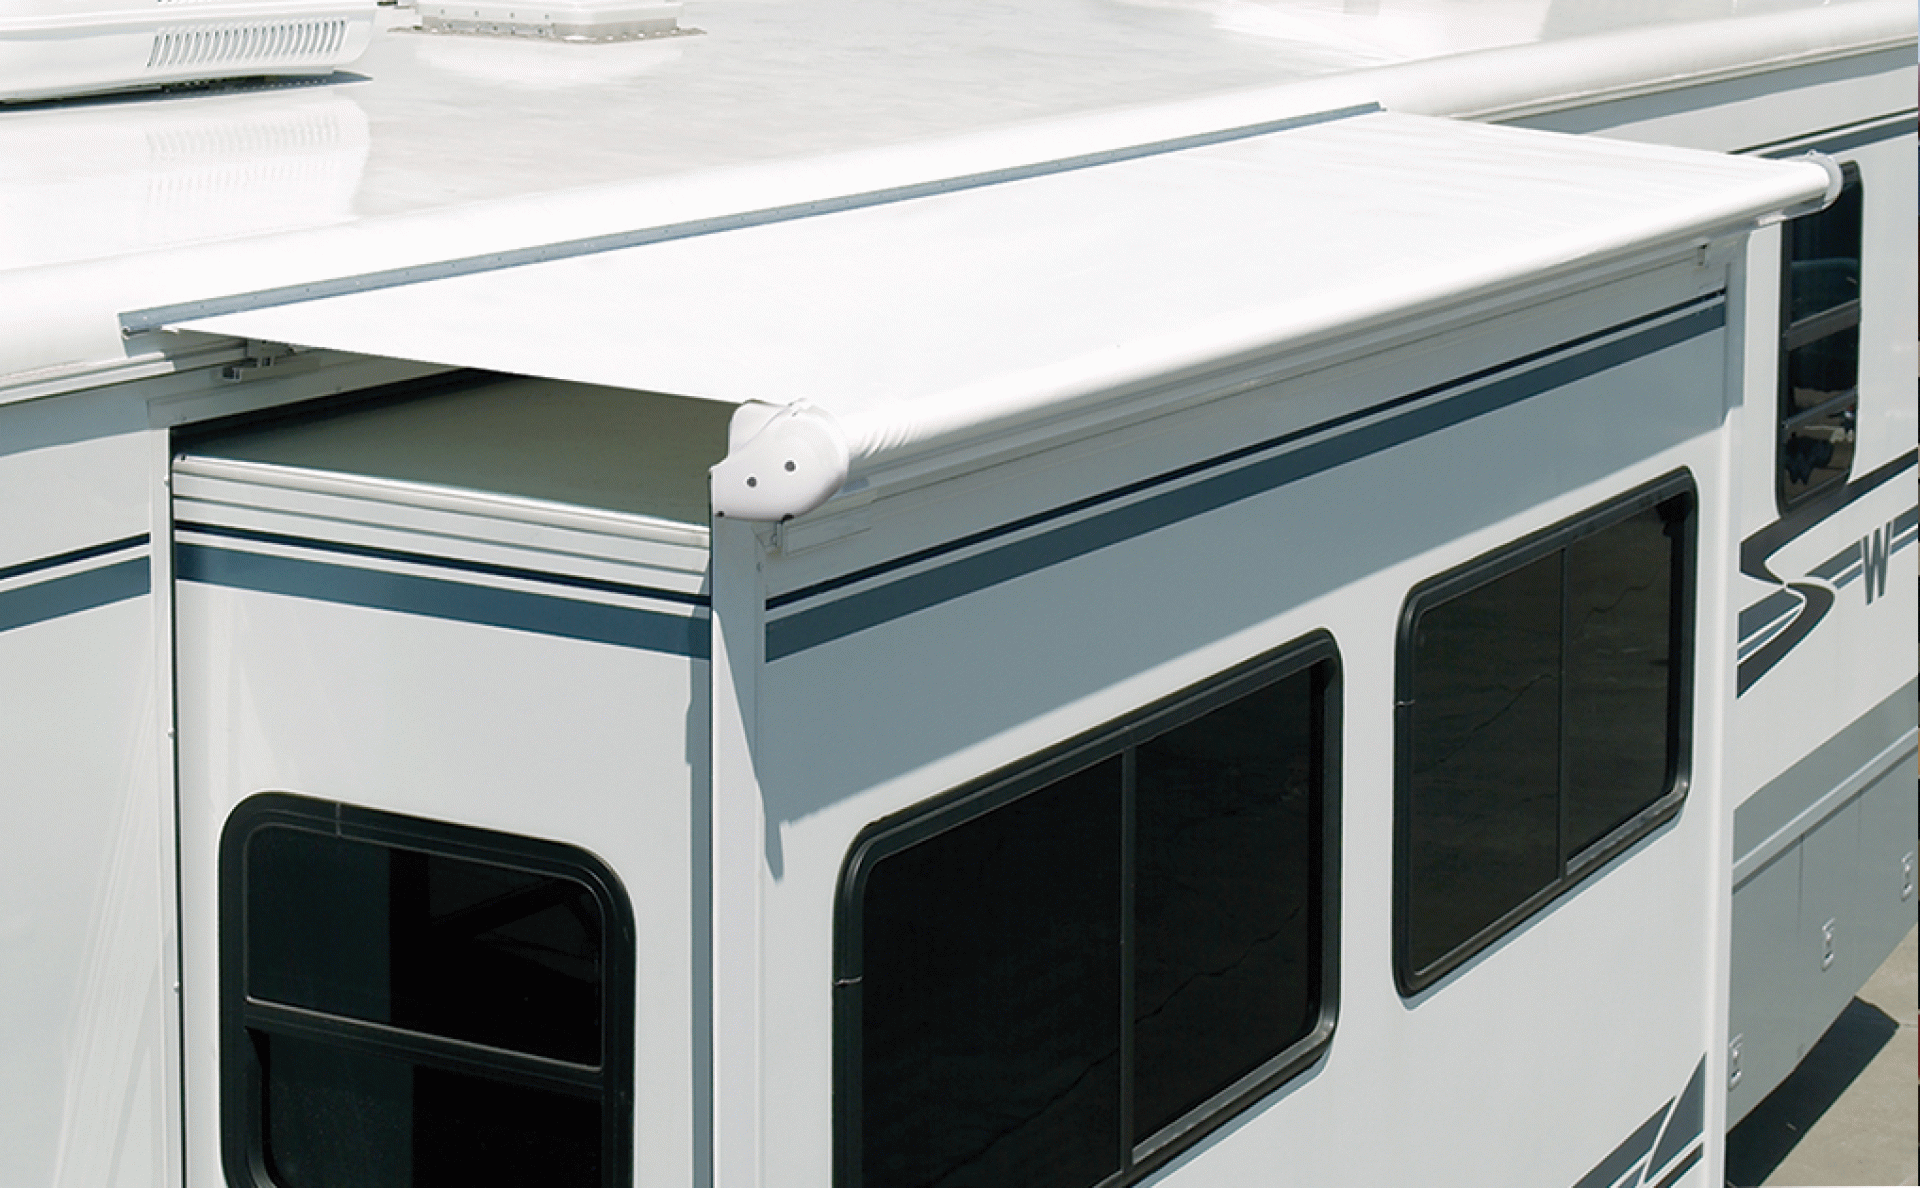 CAREFREE OF COLORADO | UQ1090025 | SIDEOUT KOVER III AWNING 102" - 109" ROOF RANGE WHITE VINYL FABRIC & DEFLECTOR